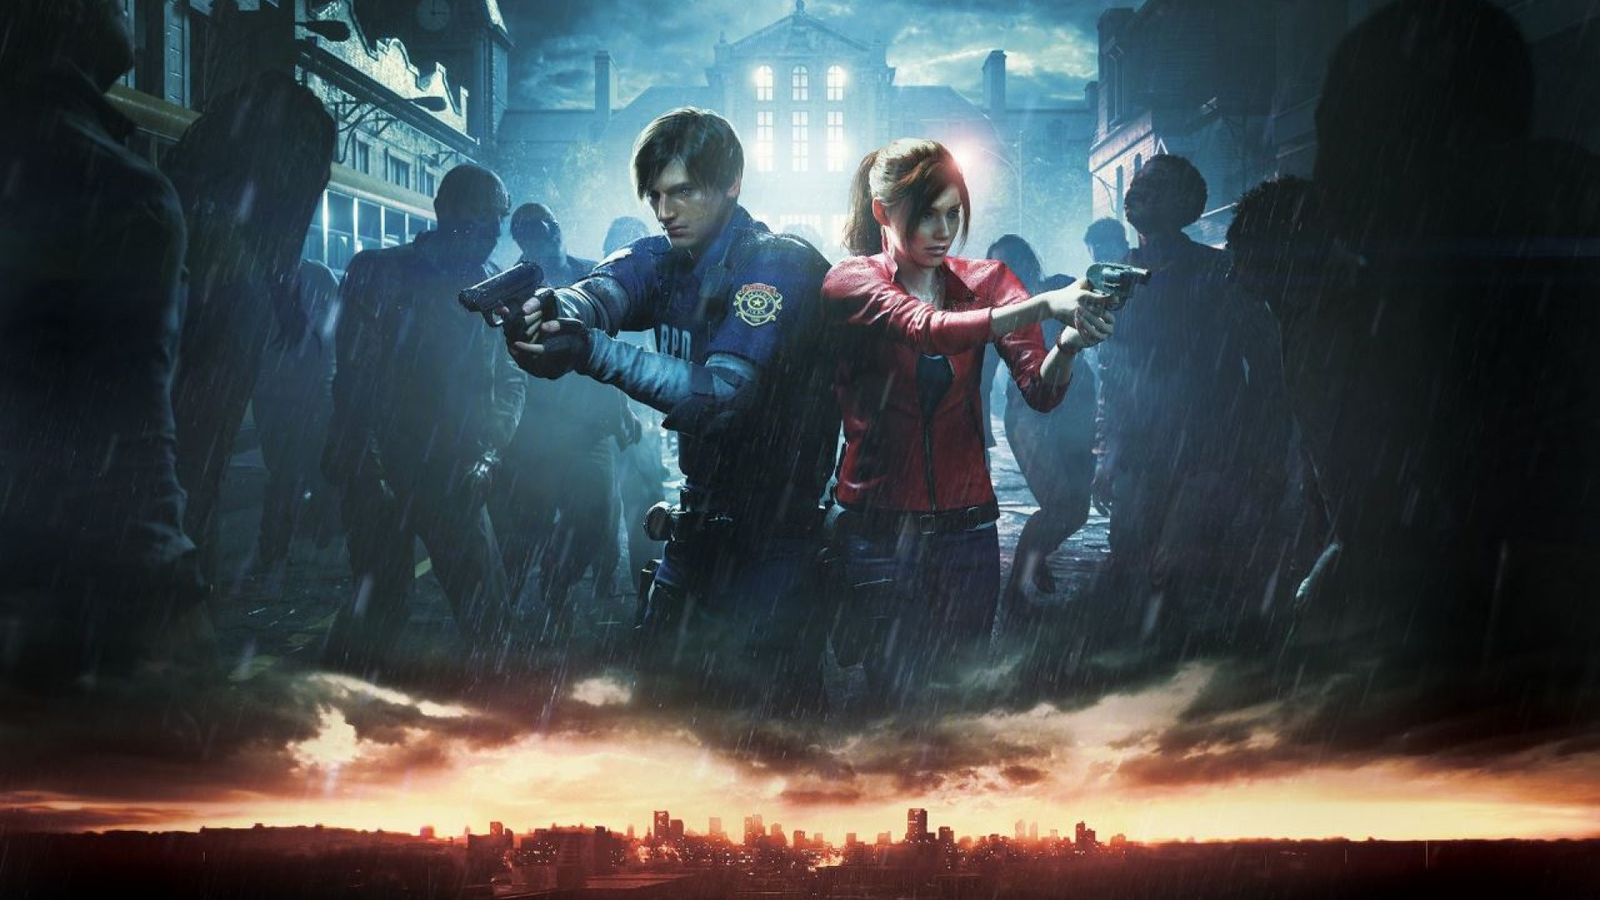 Latest Humble Bundle includes most of the Resident Evil back catalog